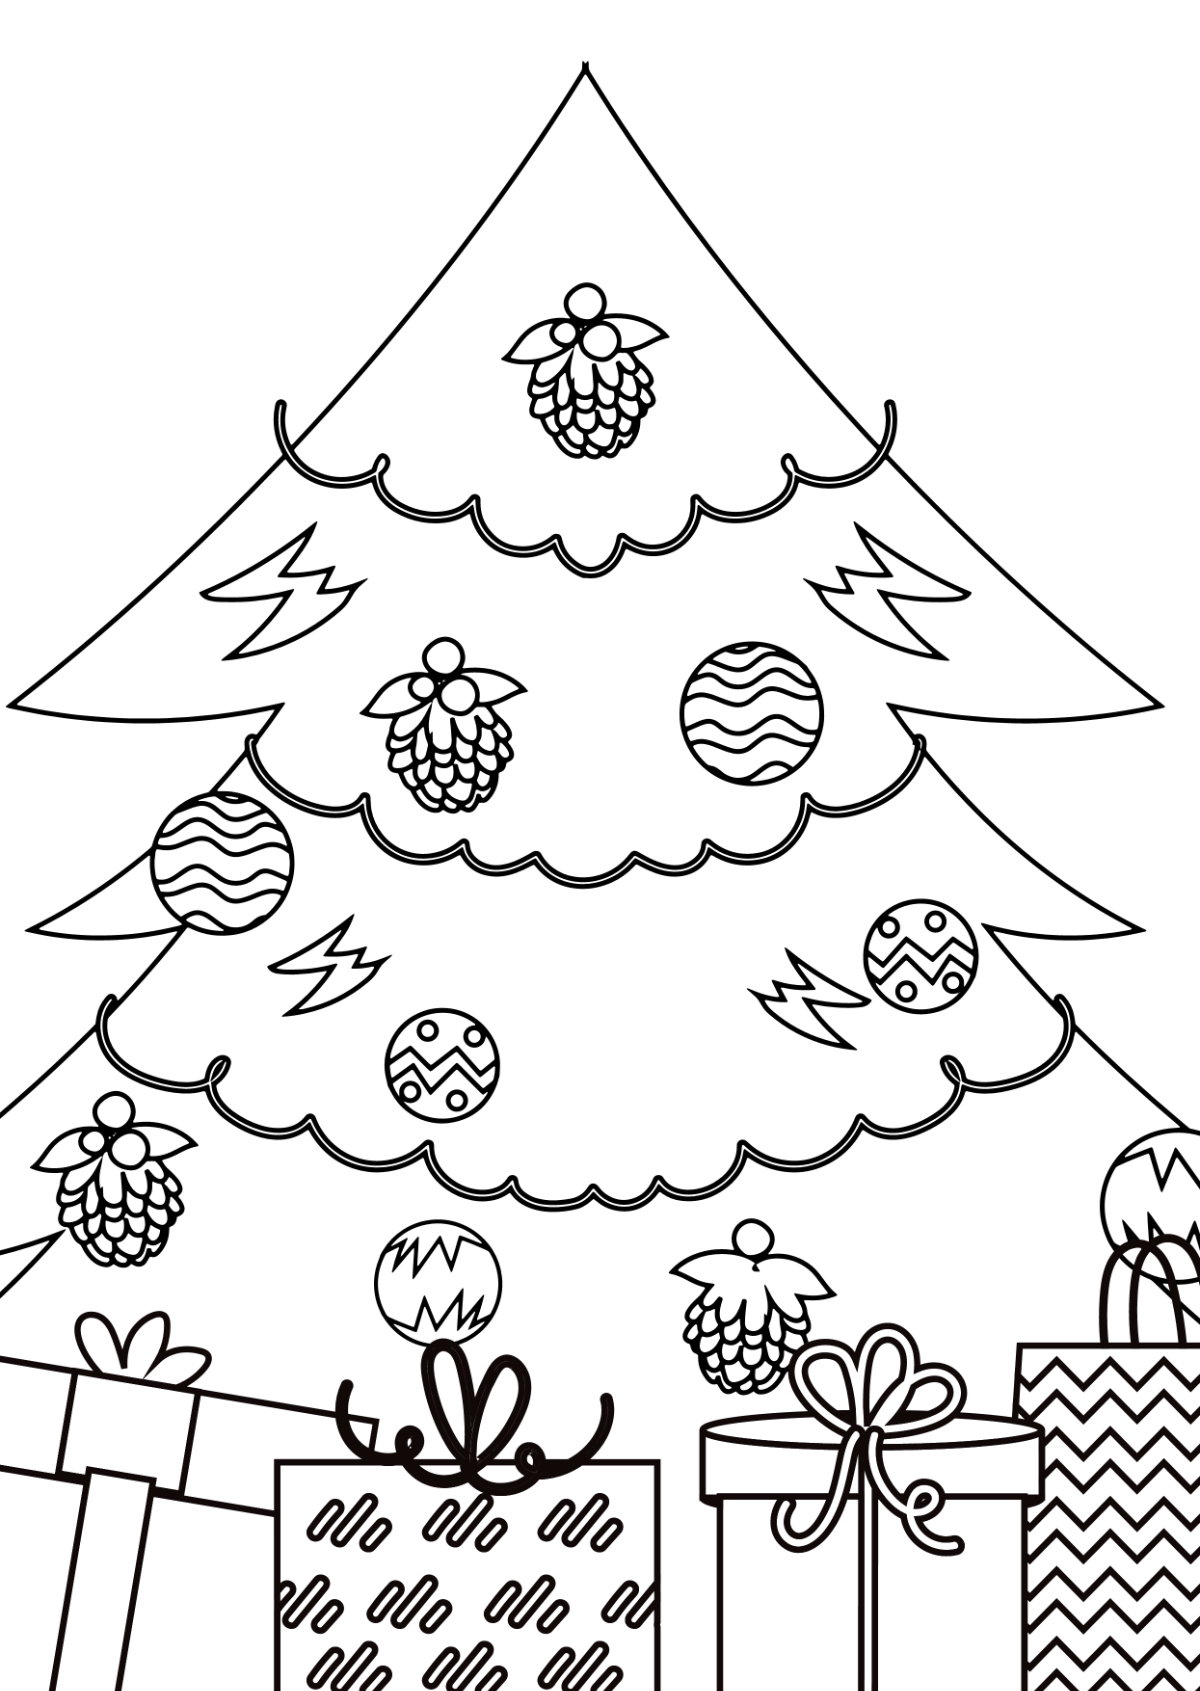 Merry Christmas Drawing Images - Free Download on Freepik